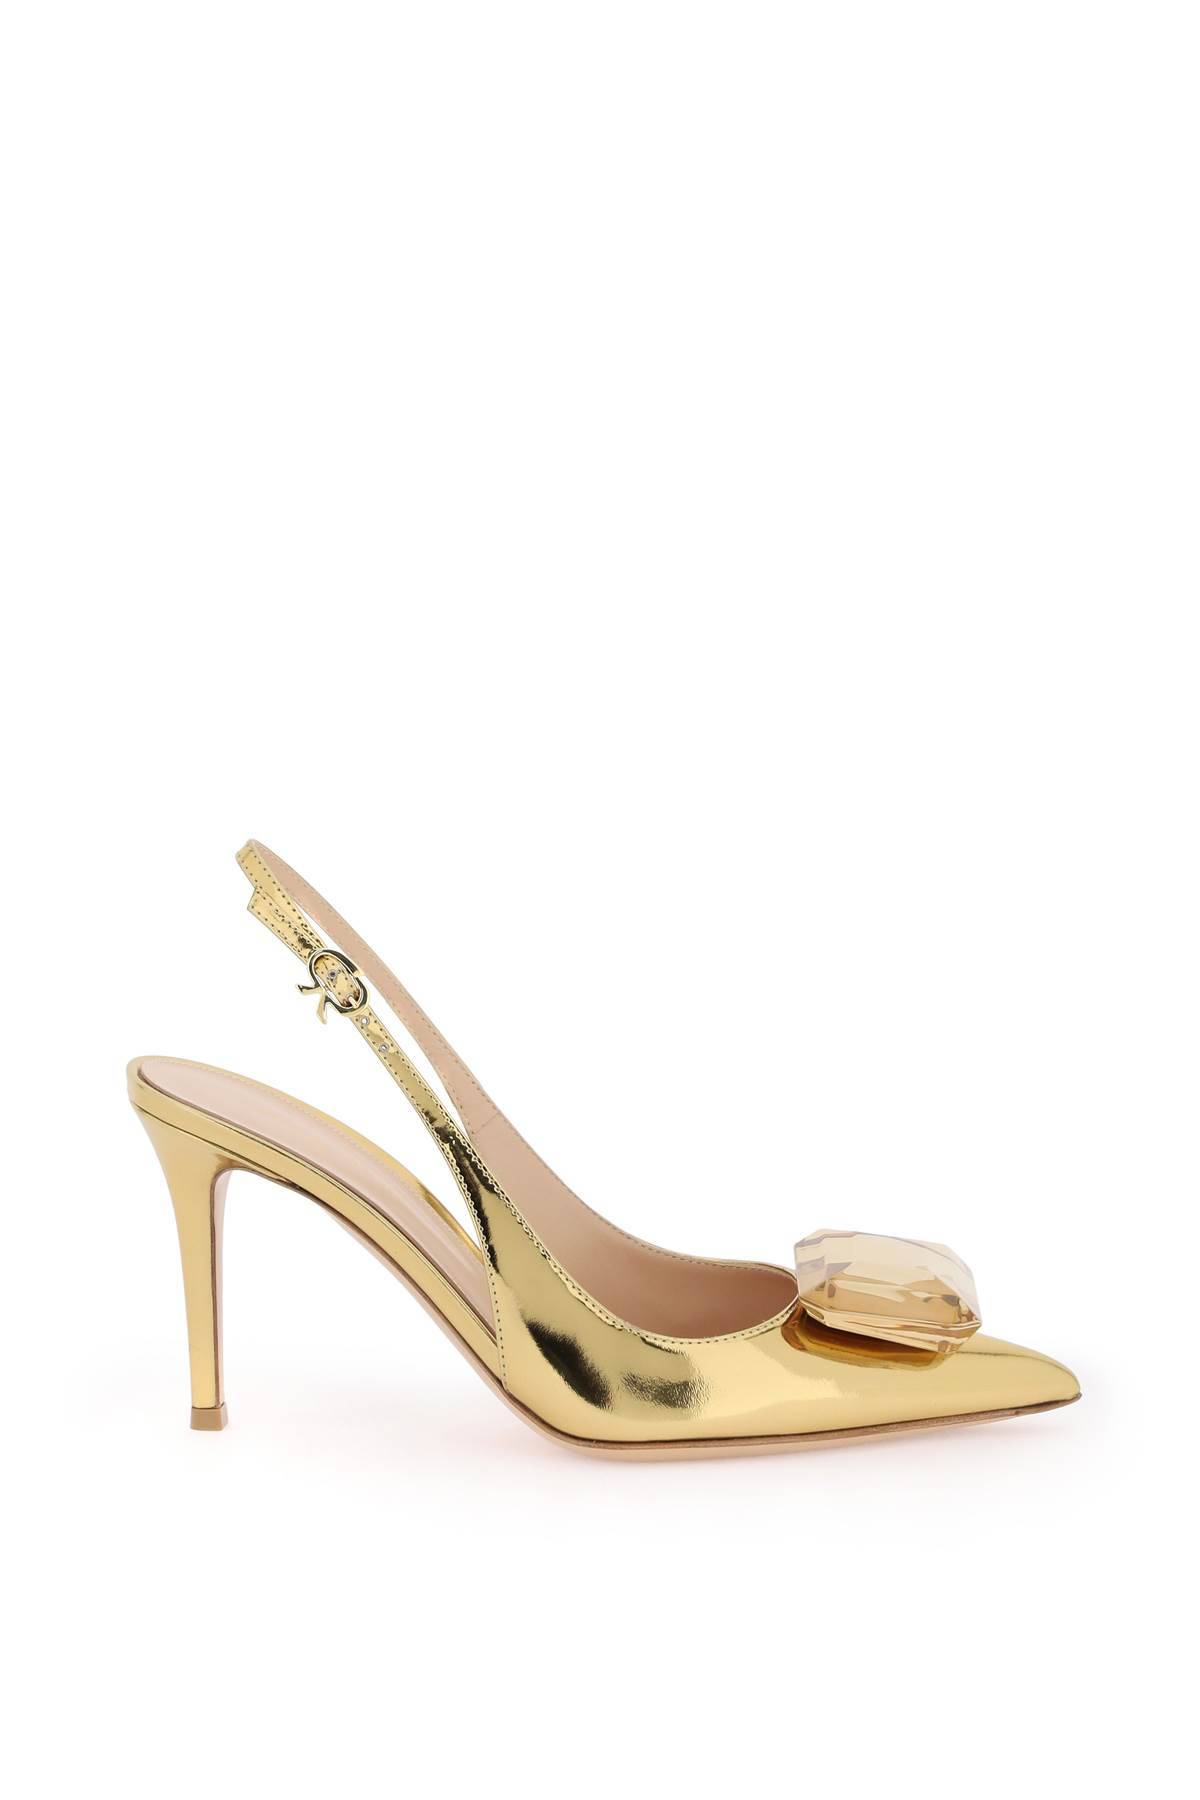 Gianvito Rossi Jaipur Slingback Pumps In Gold